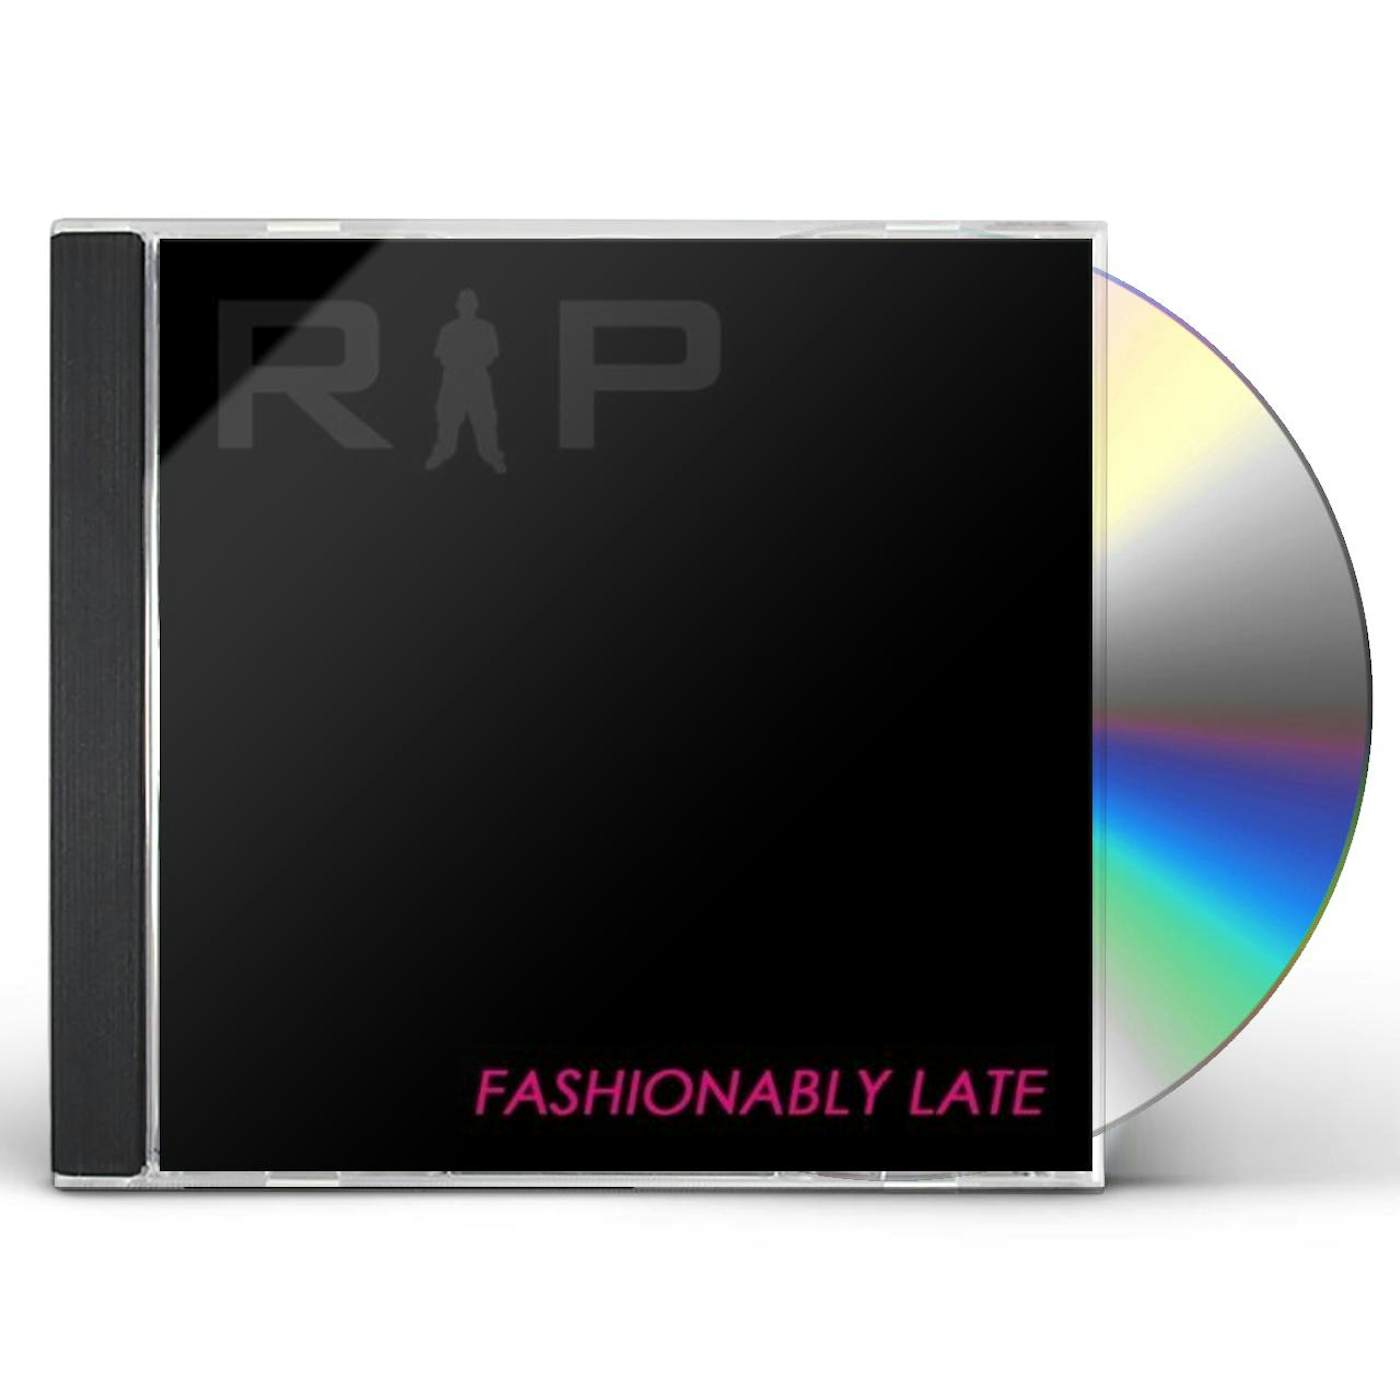 V/A - Fashionably Late Vol. 1 Cassette [NTR 100] - $7.00 : No Time Records,  Crack Rock Steady, Grind, etc